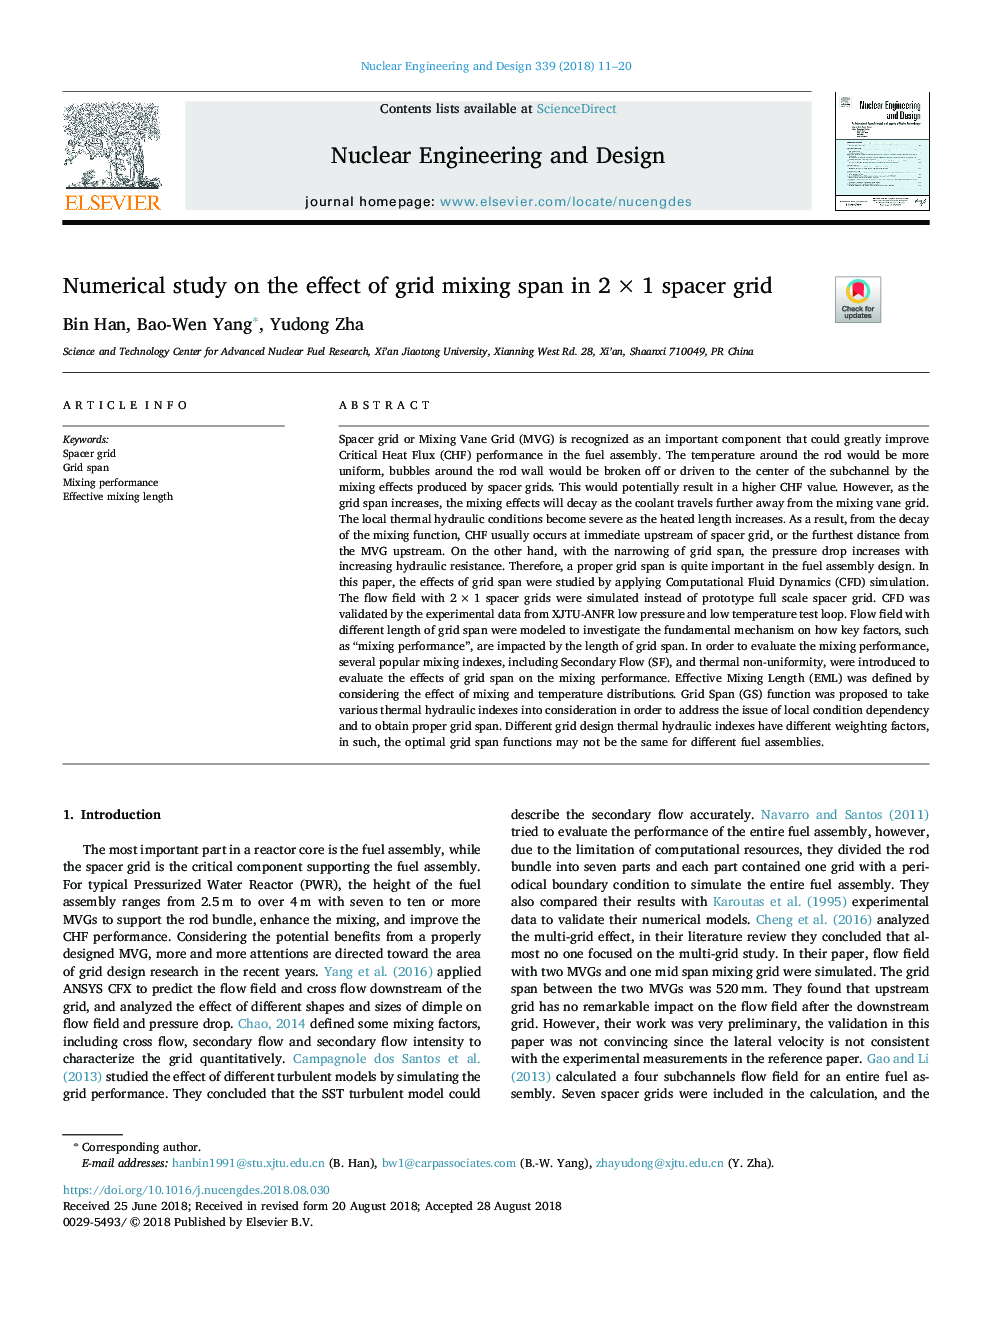 Numerical study on the effect of grid mixing span in 2â¯Ãâ¯1 spacer grid